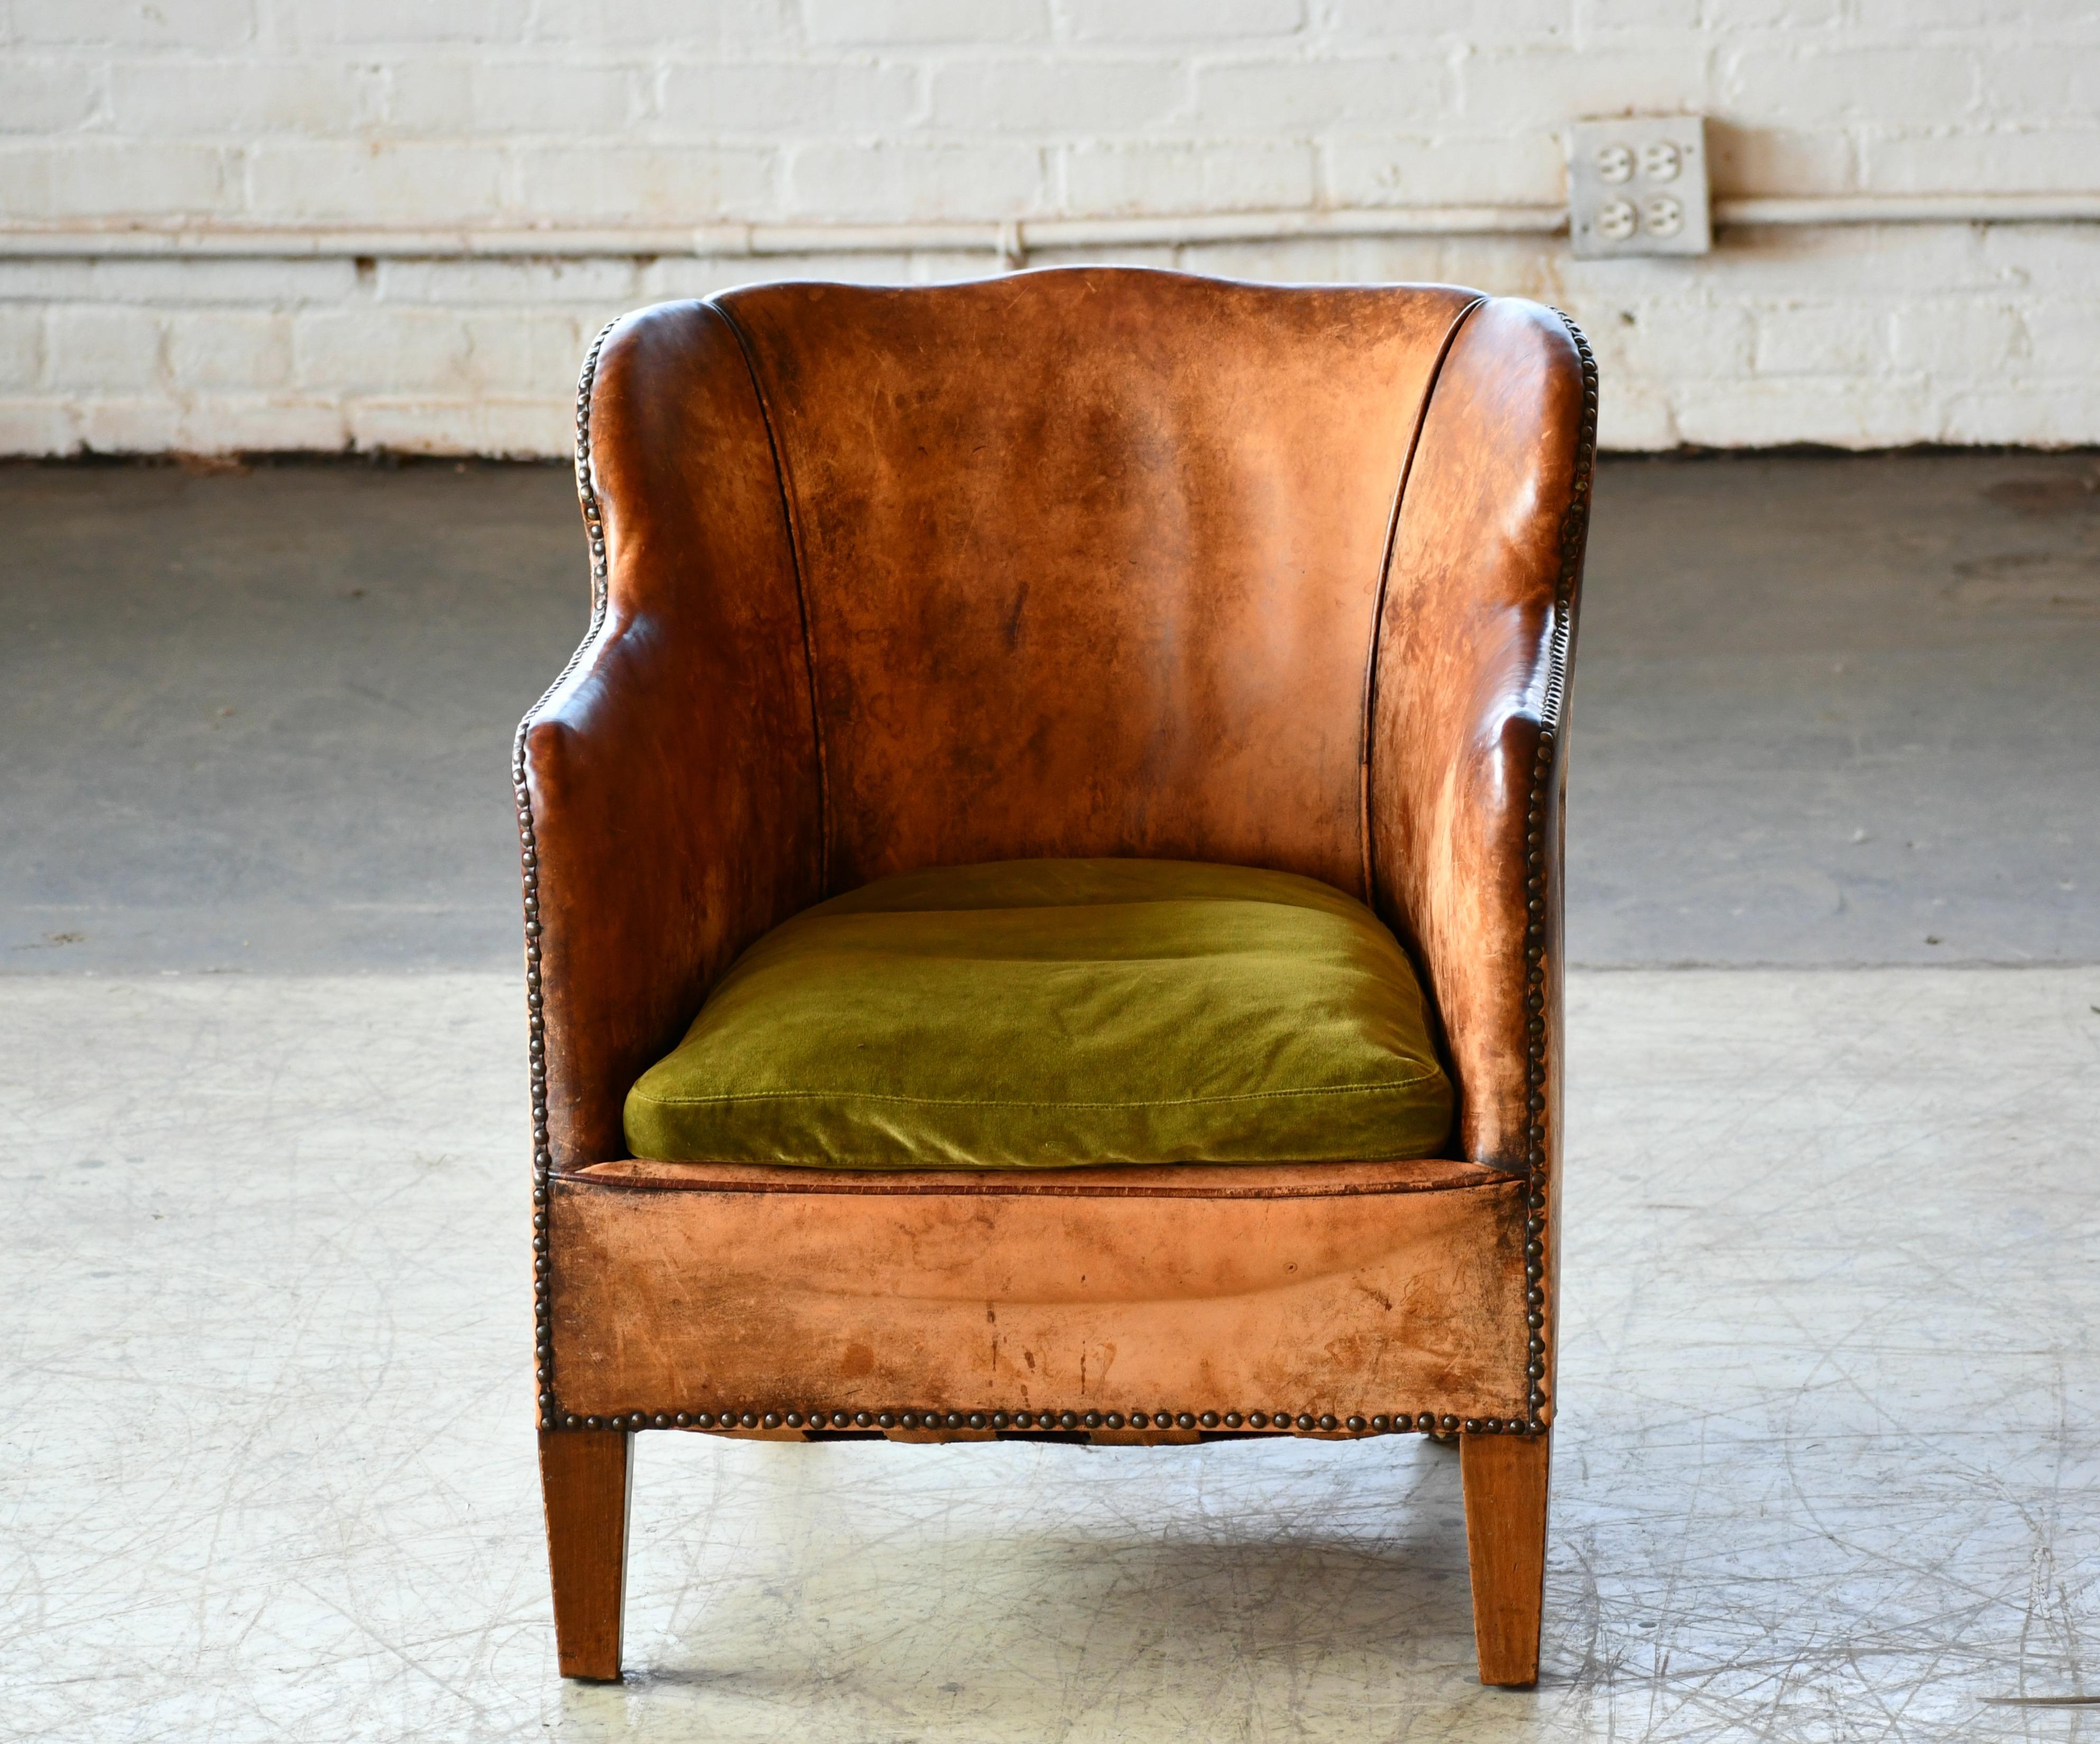 Charming small scale Danish club chair made by Danish Furniture Maker Oskar Hansen around the mid-1930s. Covered in original cognac brown leather with a smooth back. Overall good condition for its age and use with lots noble patina and wear